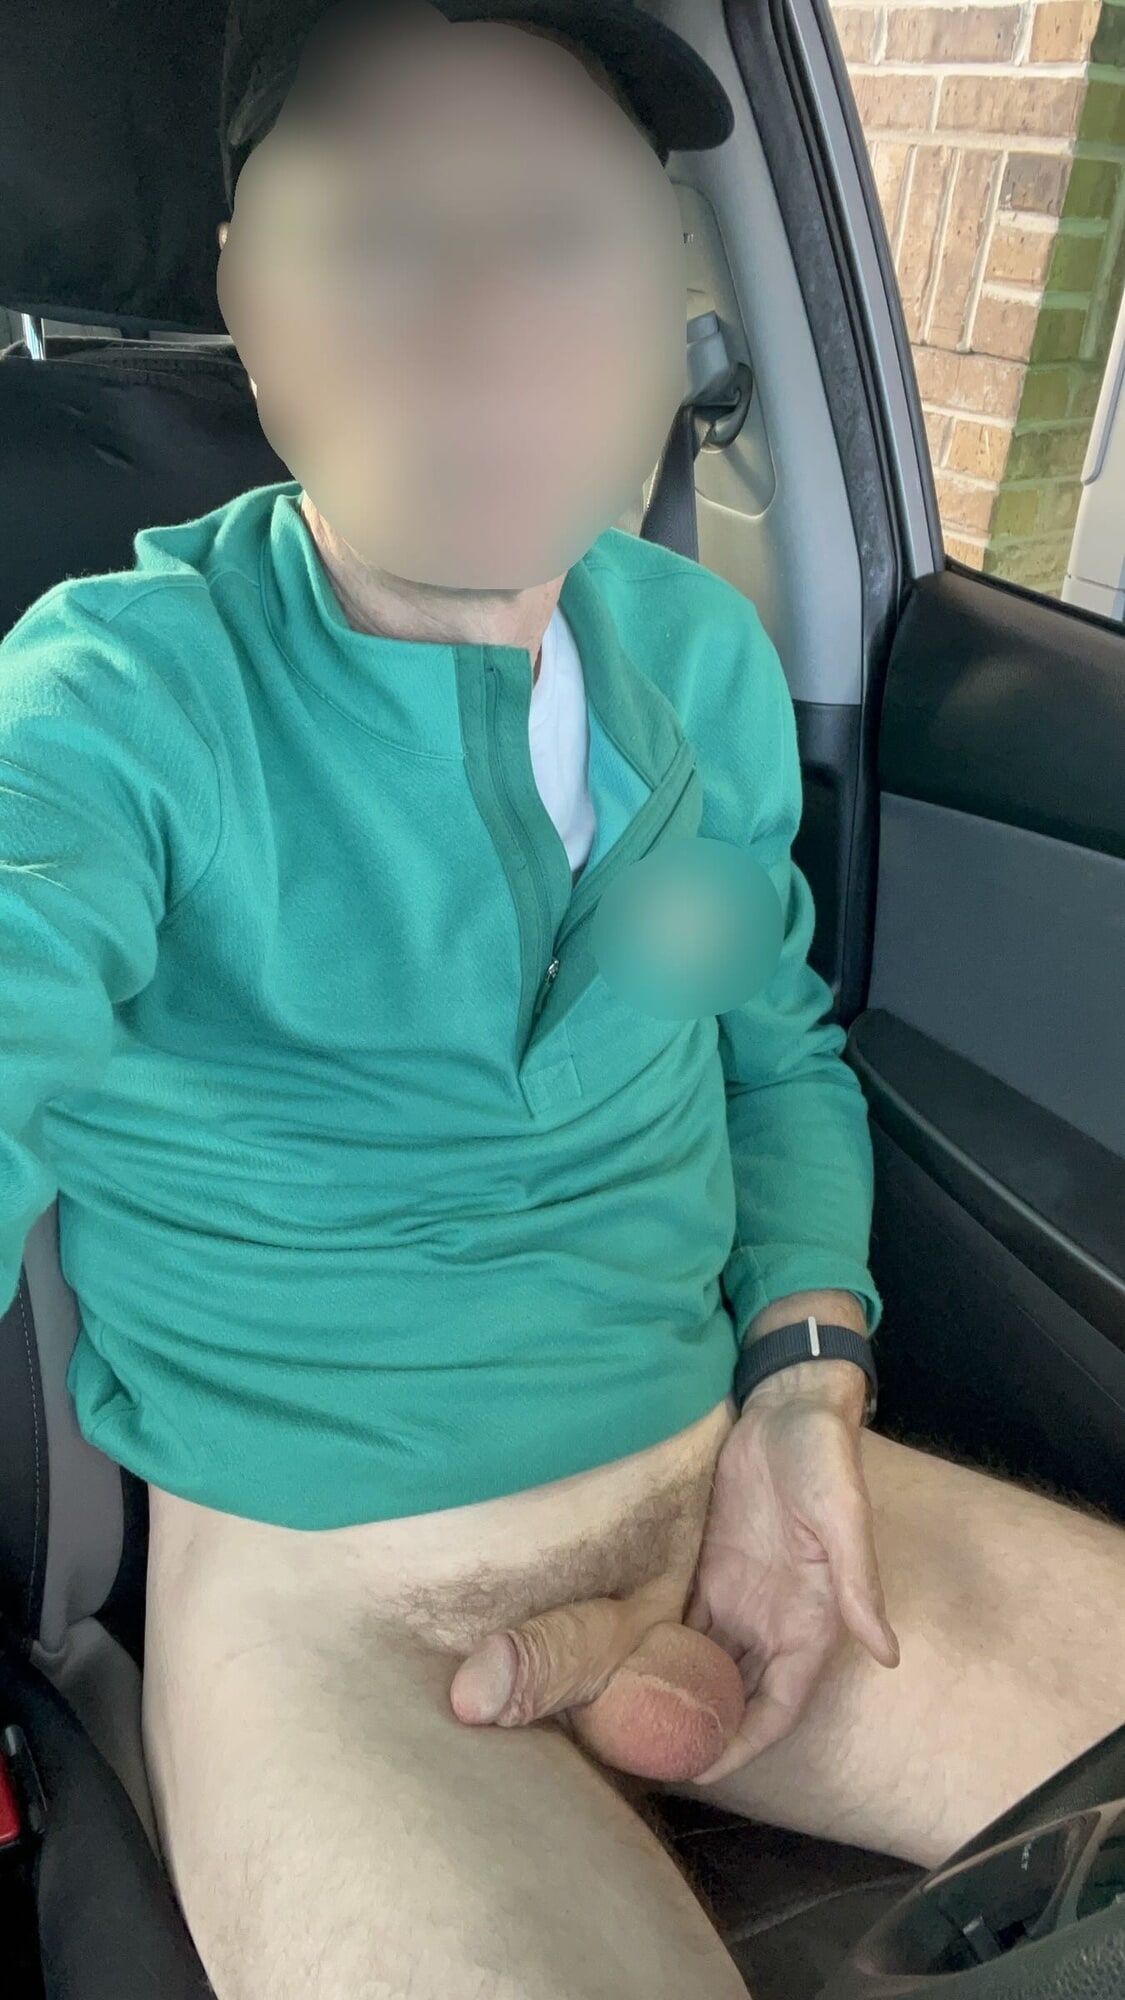 Pictures of My Cock to End the Summer #5